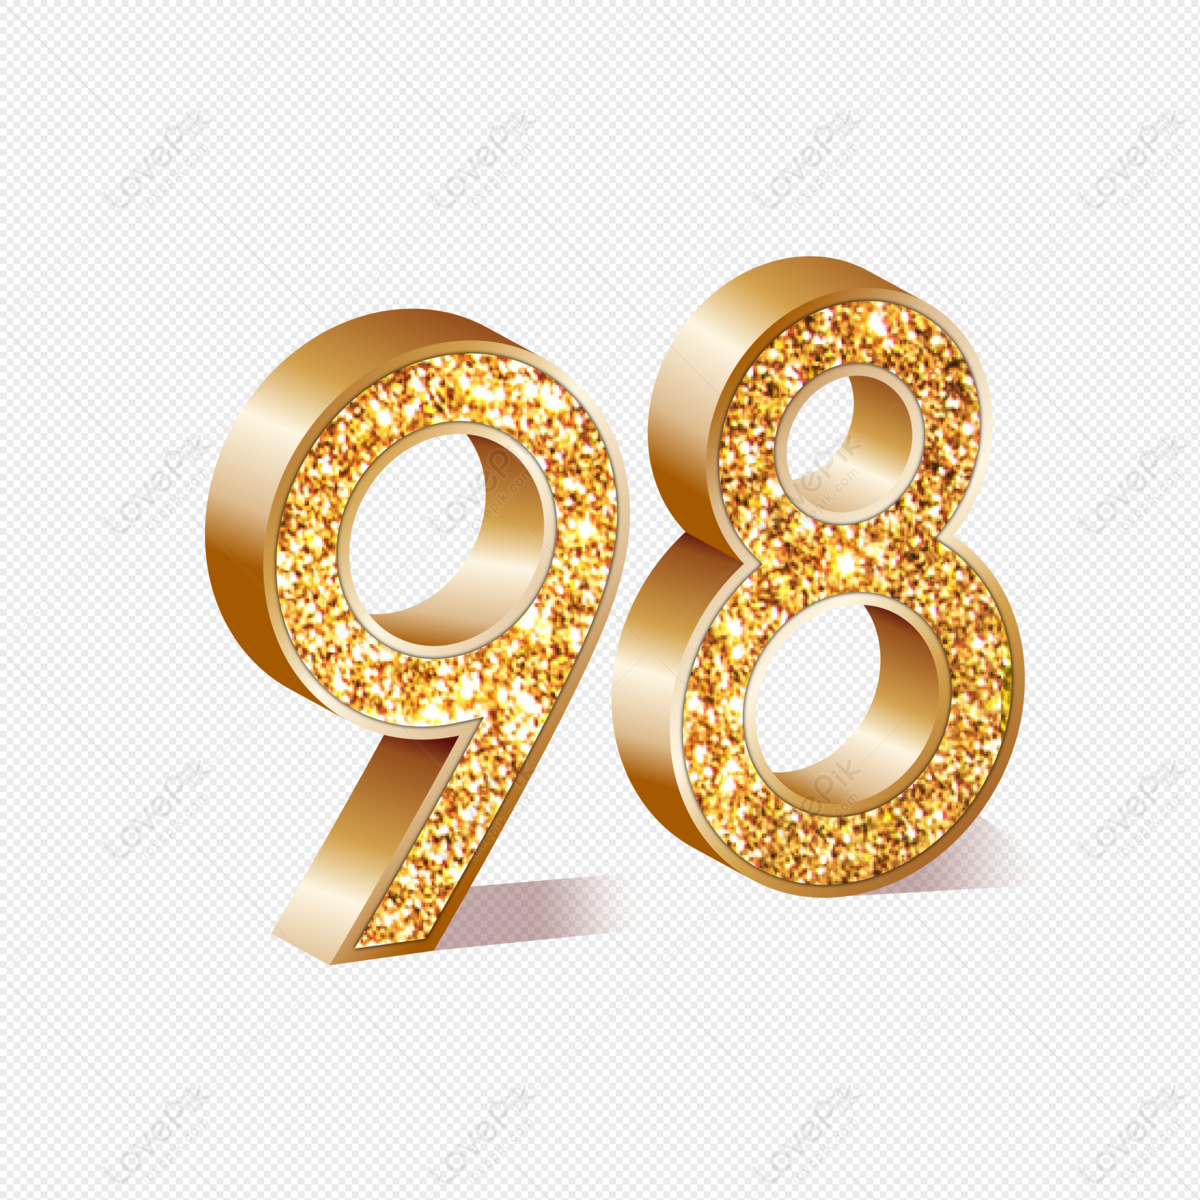 98th Anniversary PNG Images With Transparent Background | Free Download ...